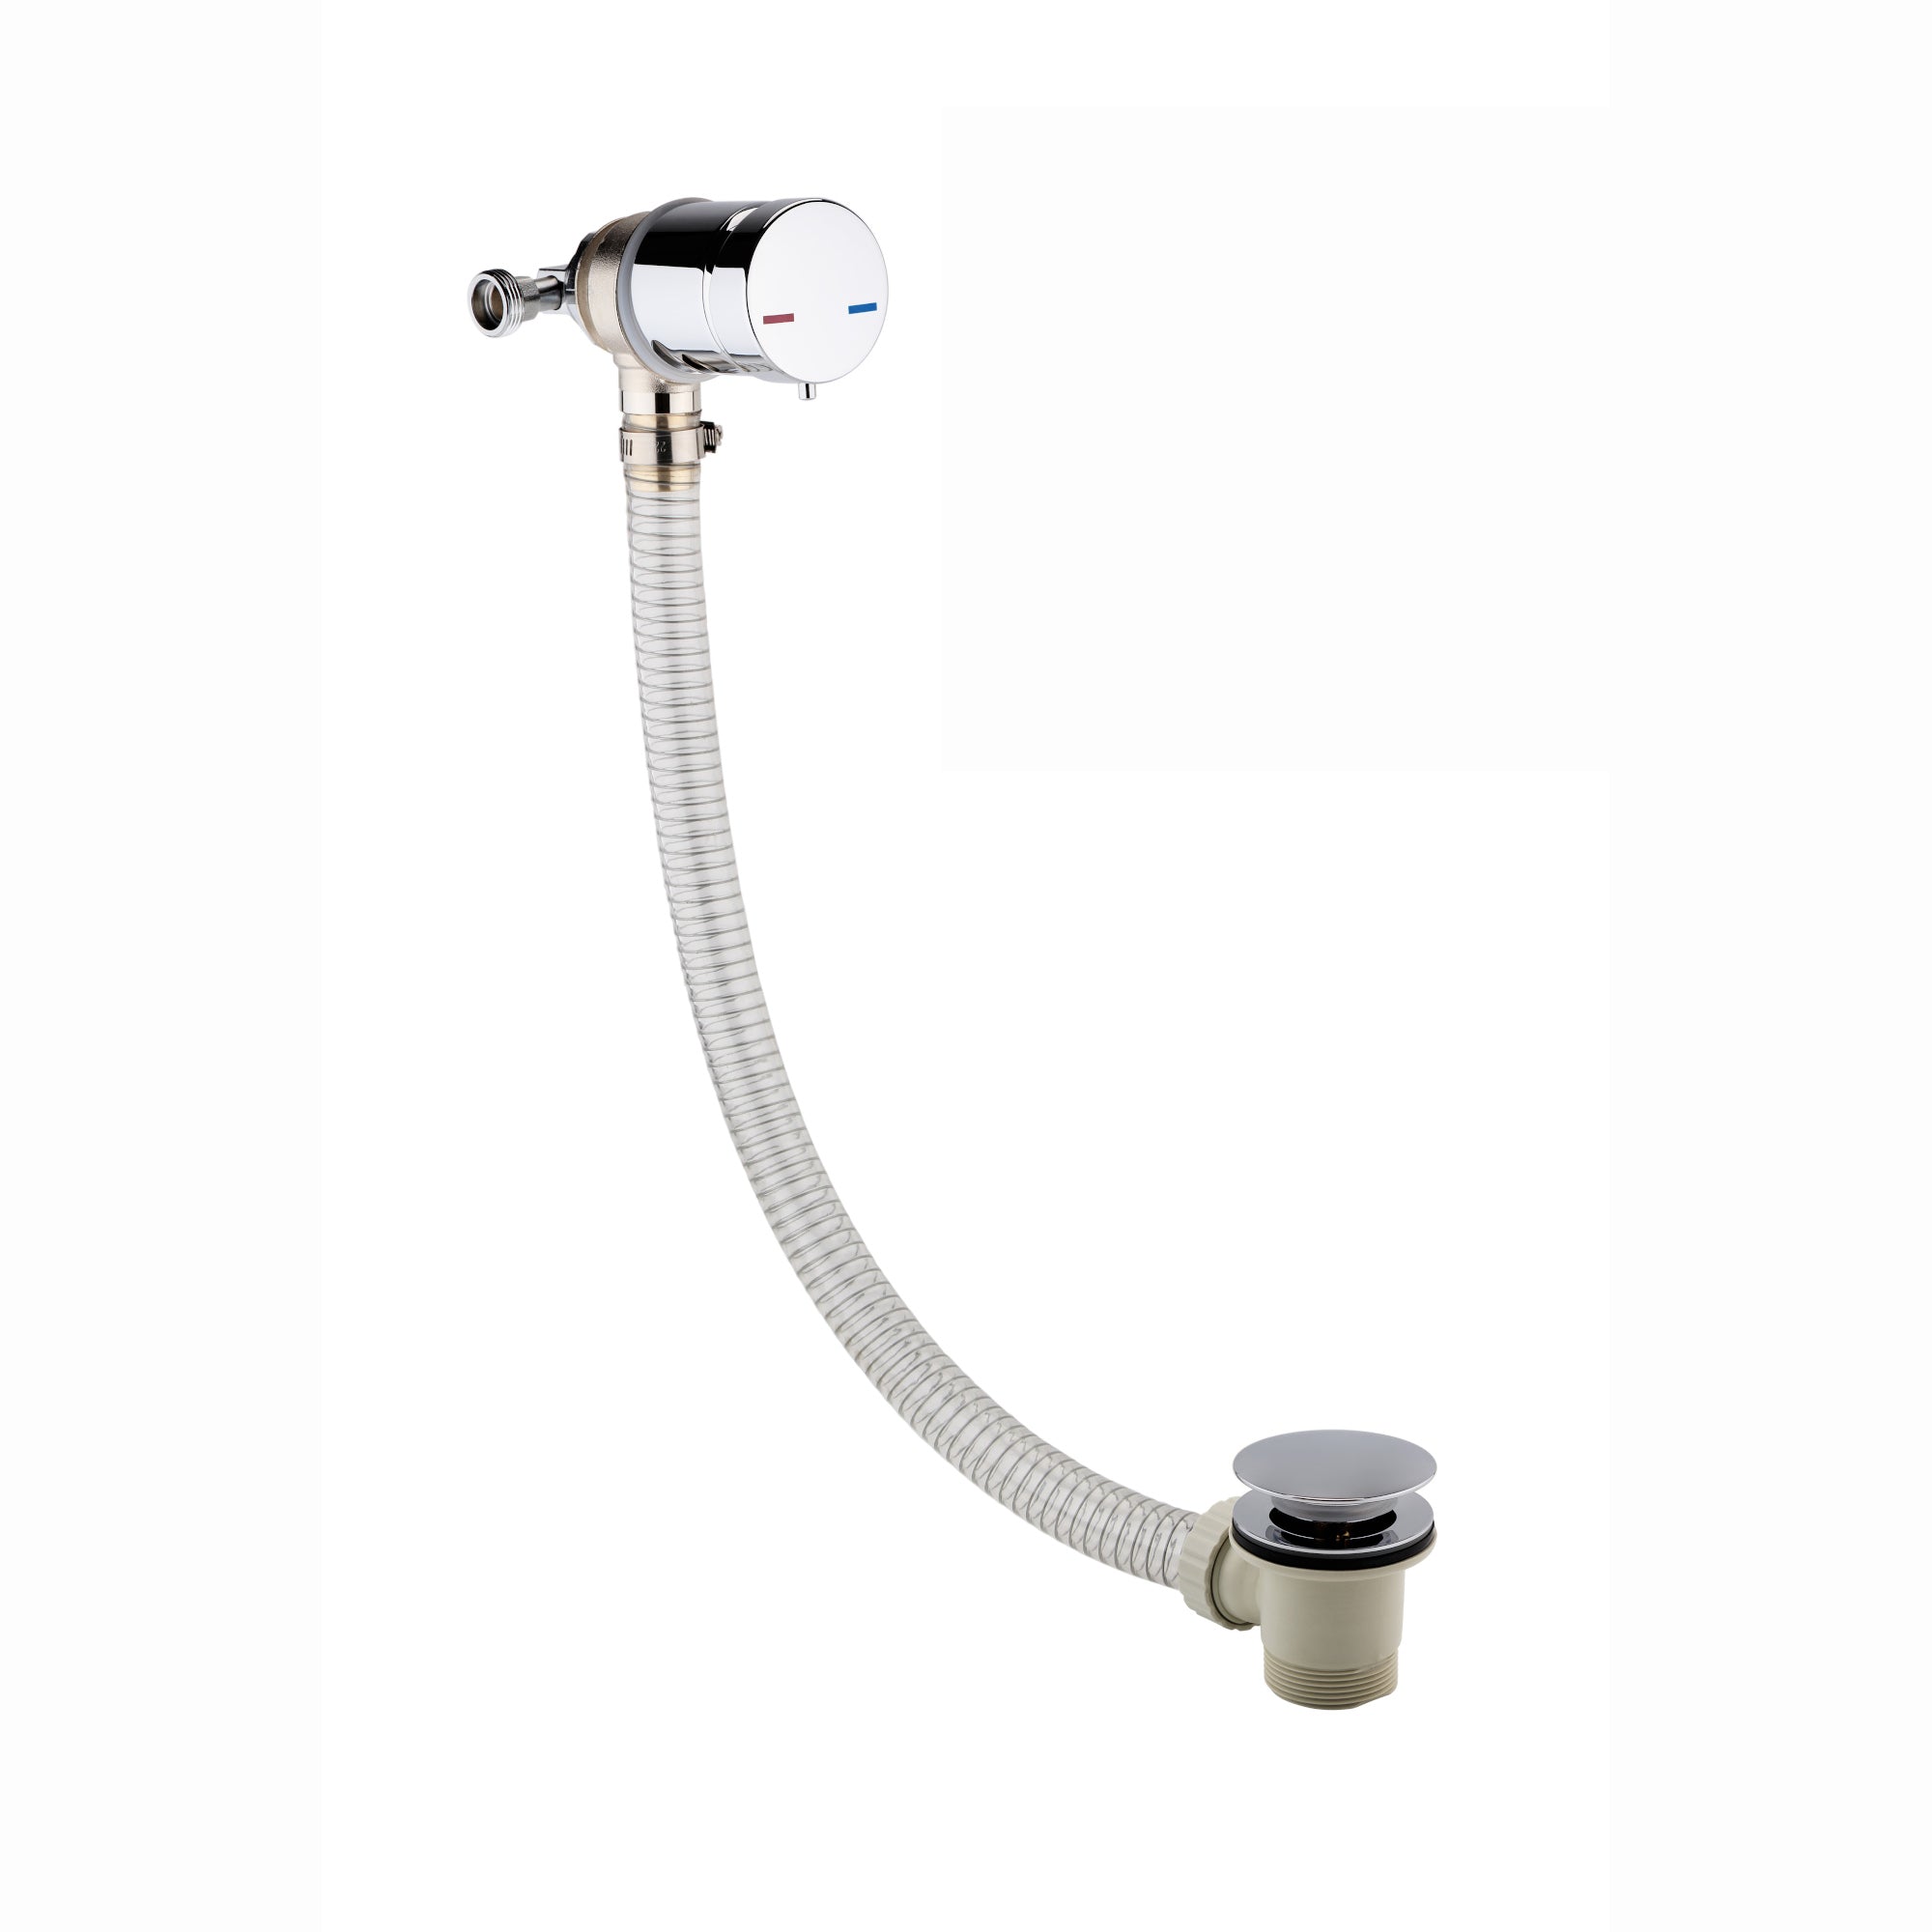 Round temperature control bath mixer filler with overflow and clicker waste - chrome